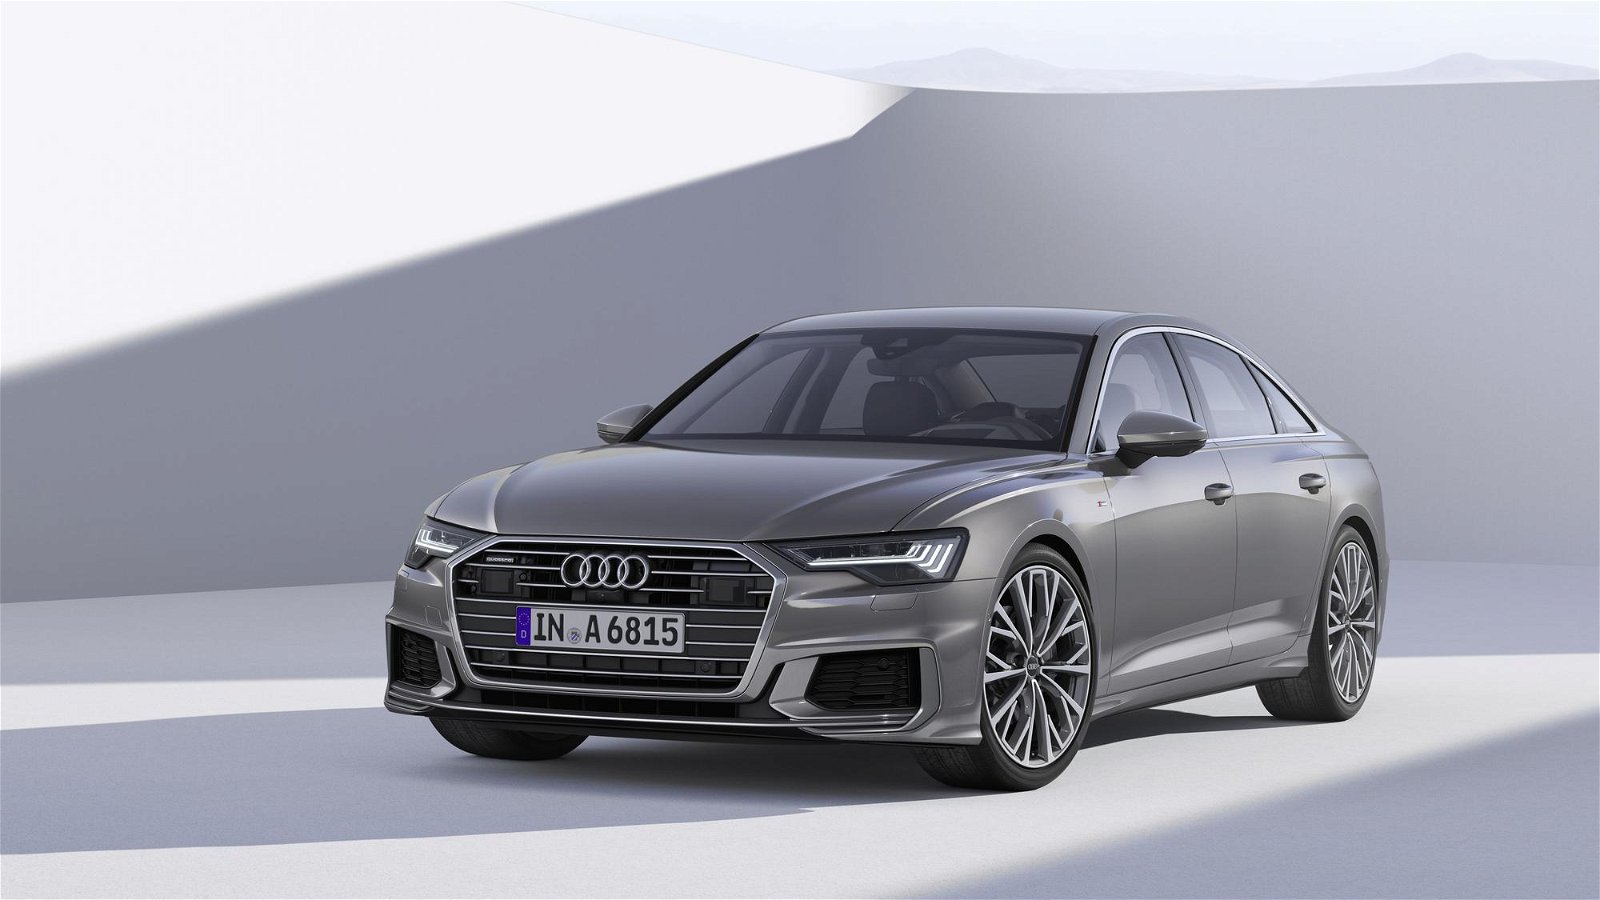 2019 Audi A6 C8 official pictures 12